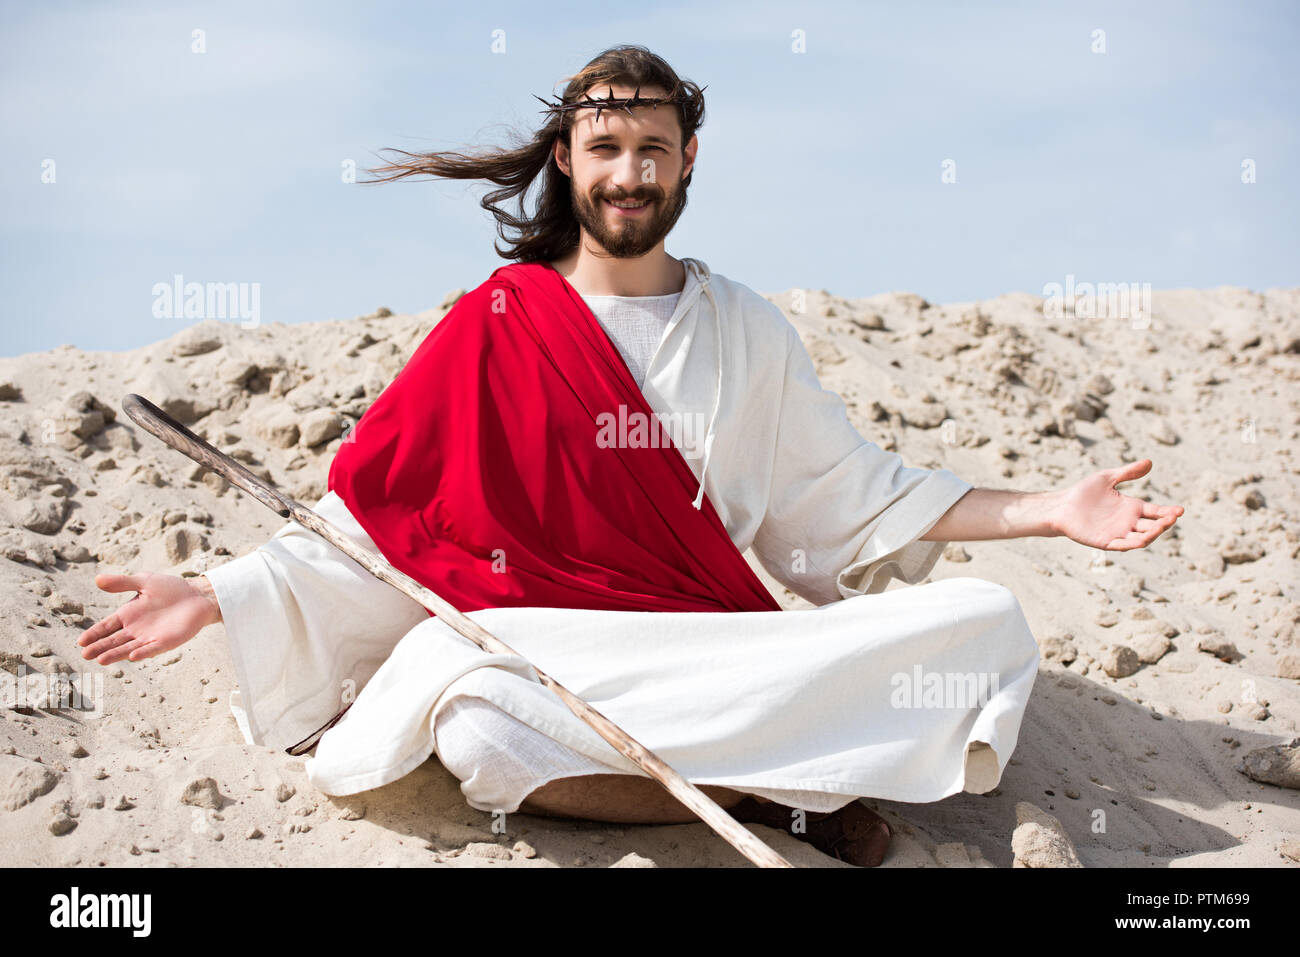 smiling Jesus in robe, red sash and crown of thorns sitting in ...